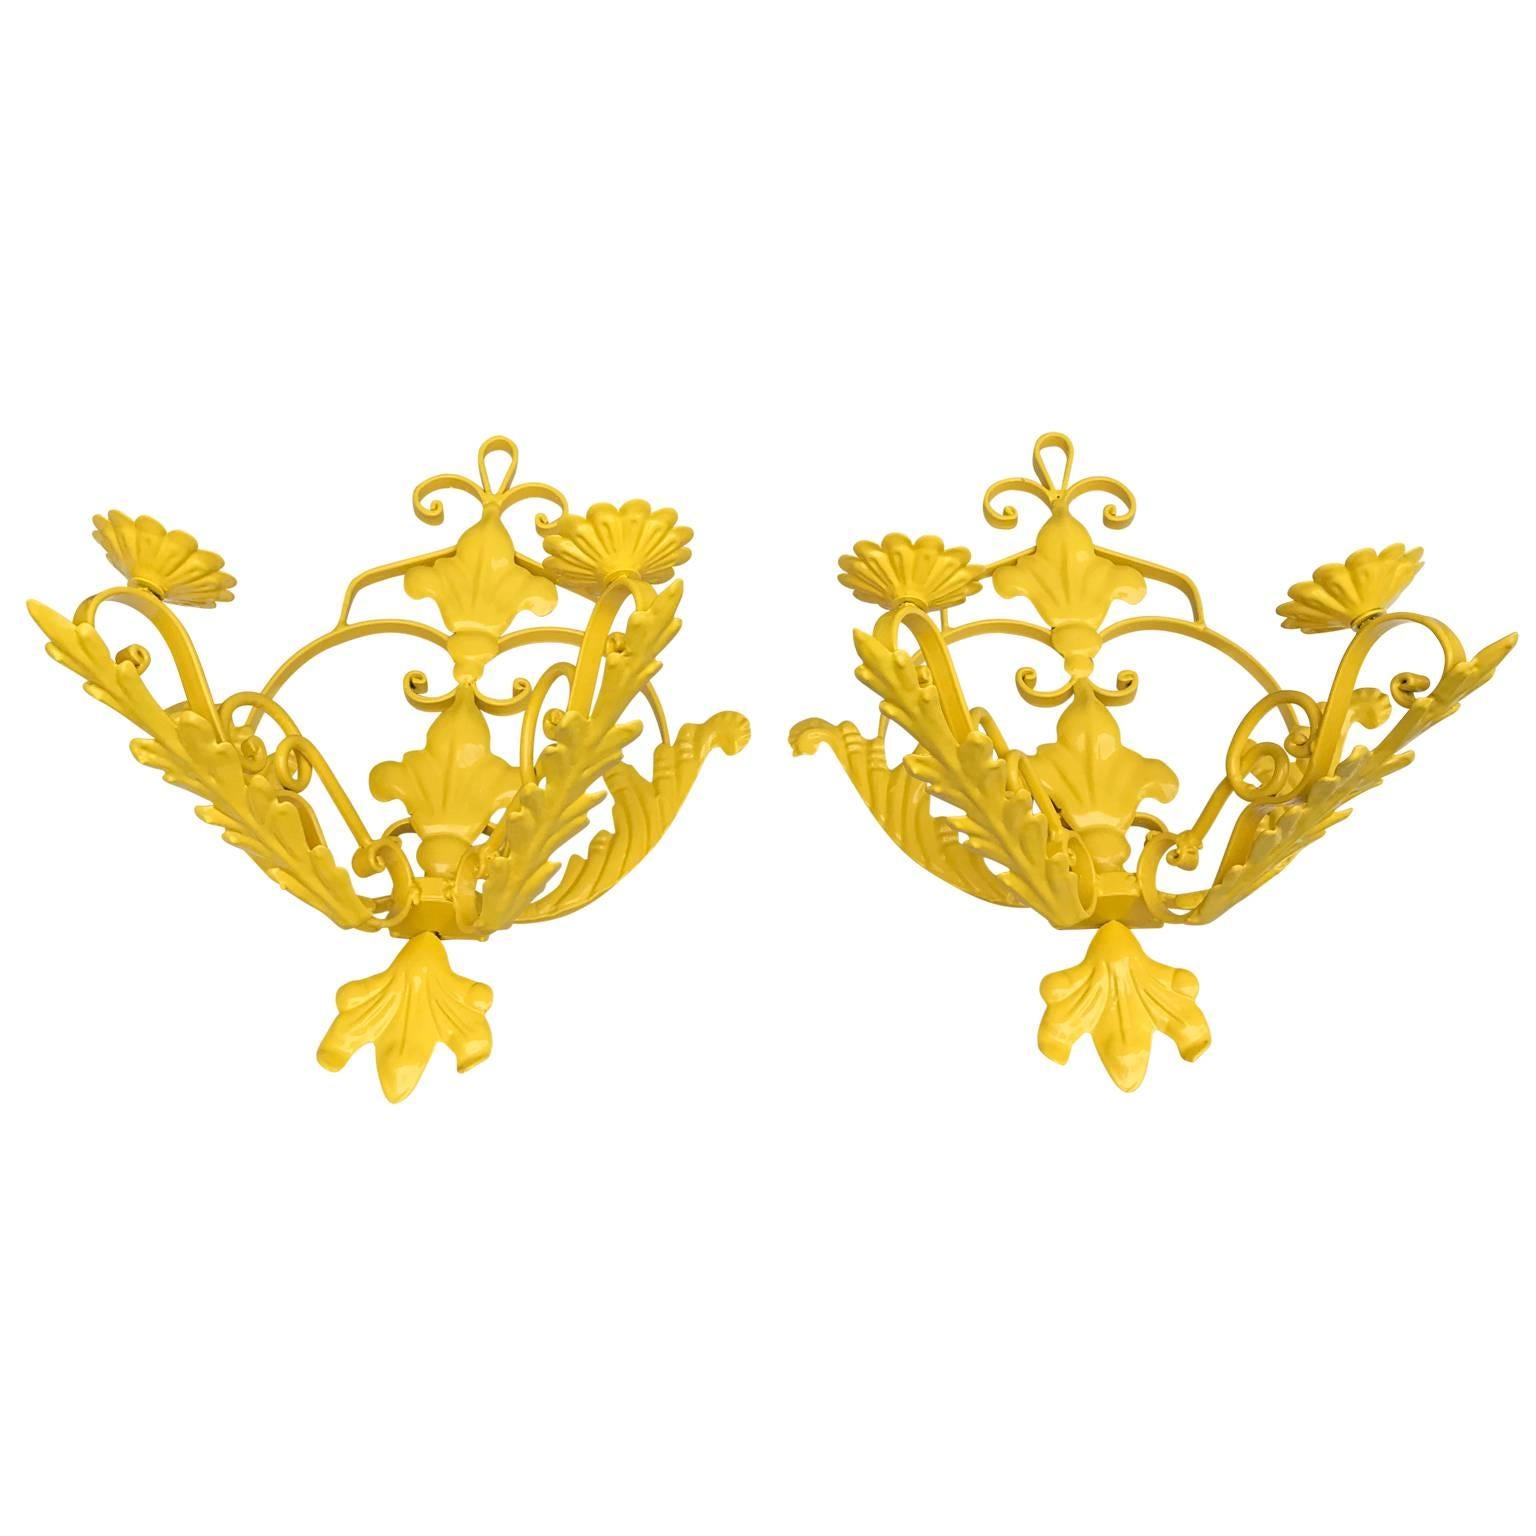 Set of two painted iron wall lights in a bright sunshine yellow powder-coating.
Wall lights can be electrified upon request at an additional cost